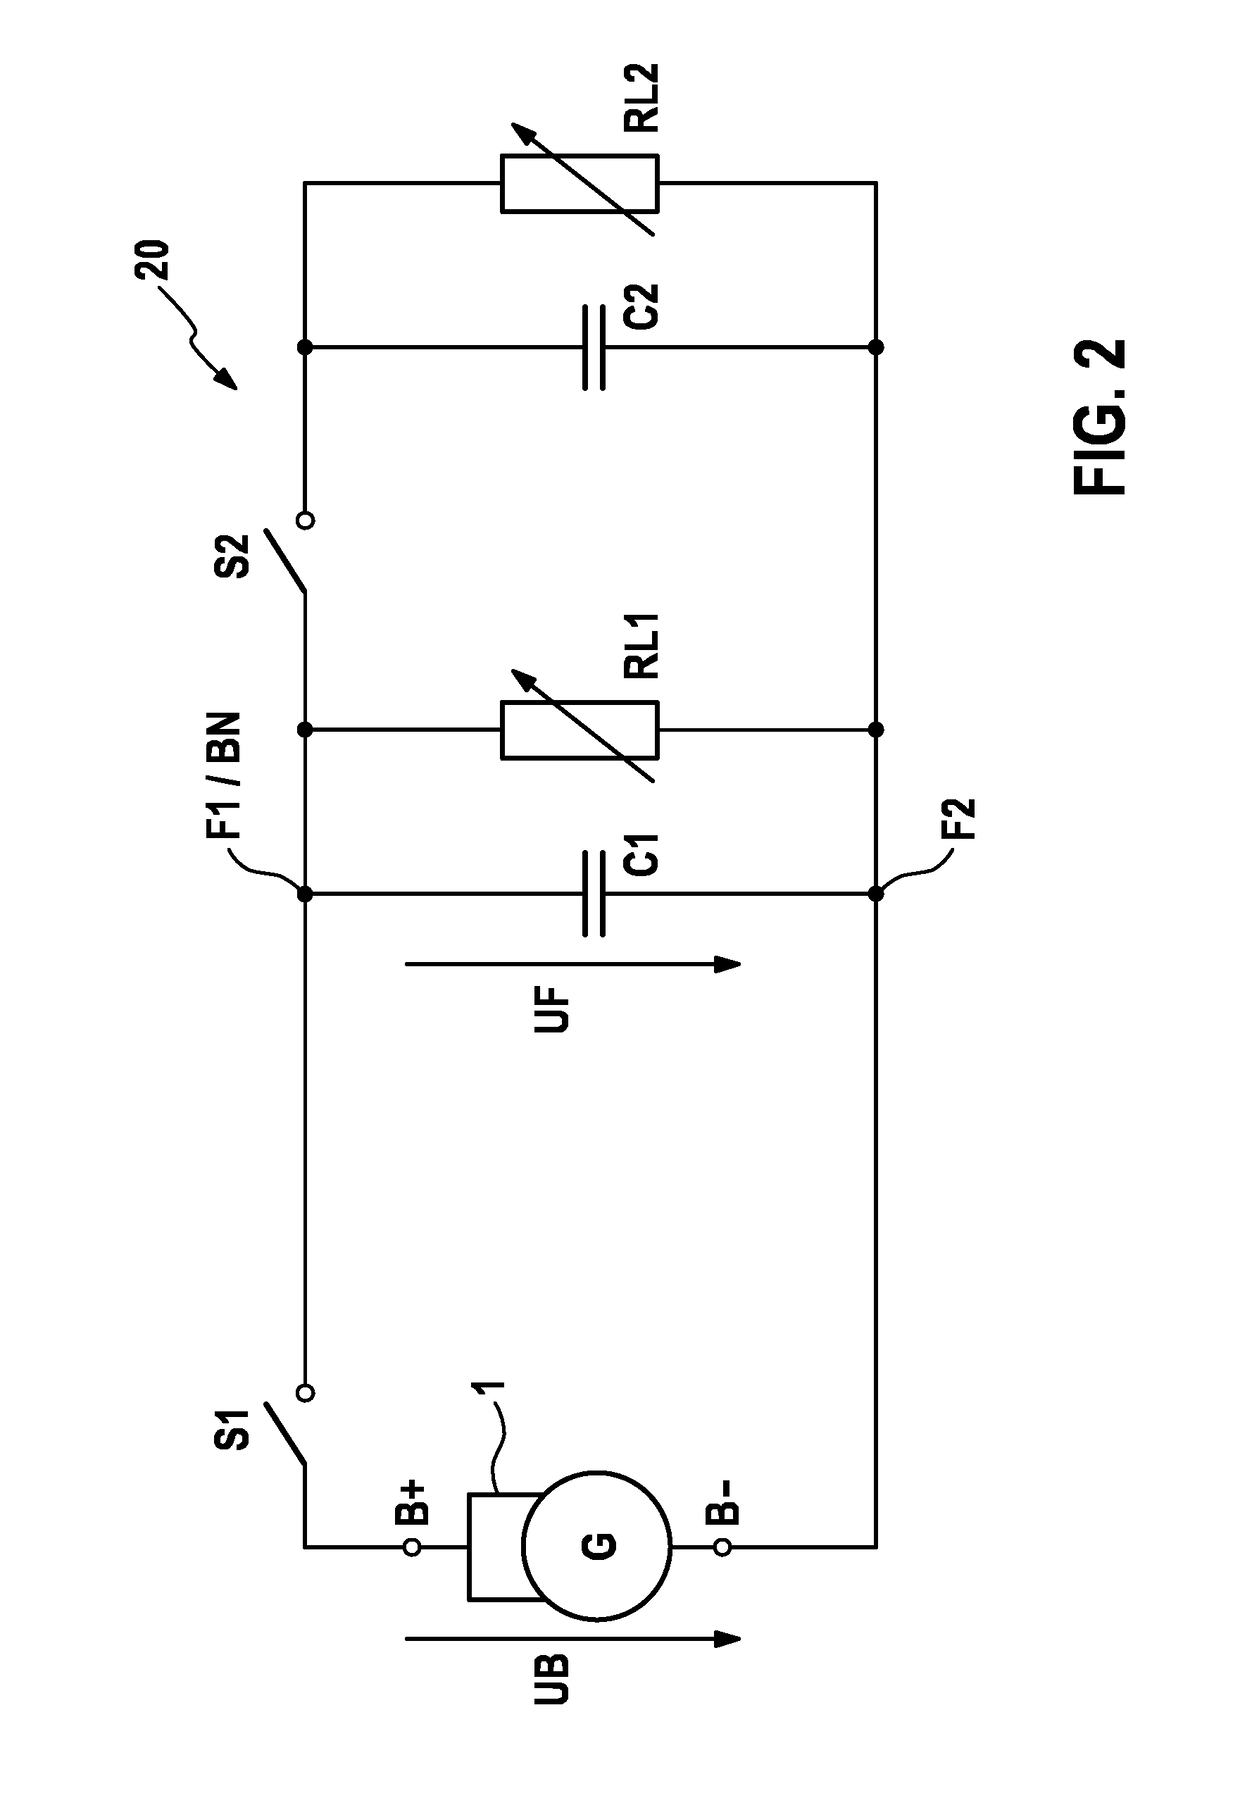 Overvoltage protection for a motor vehicle electrical system in the event of a load dump